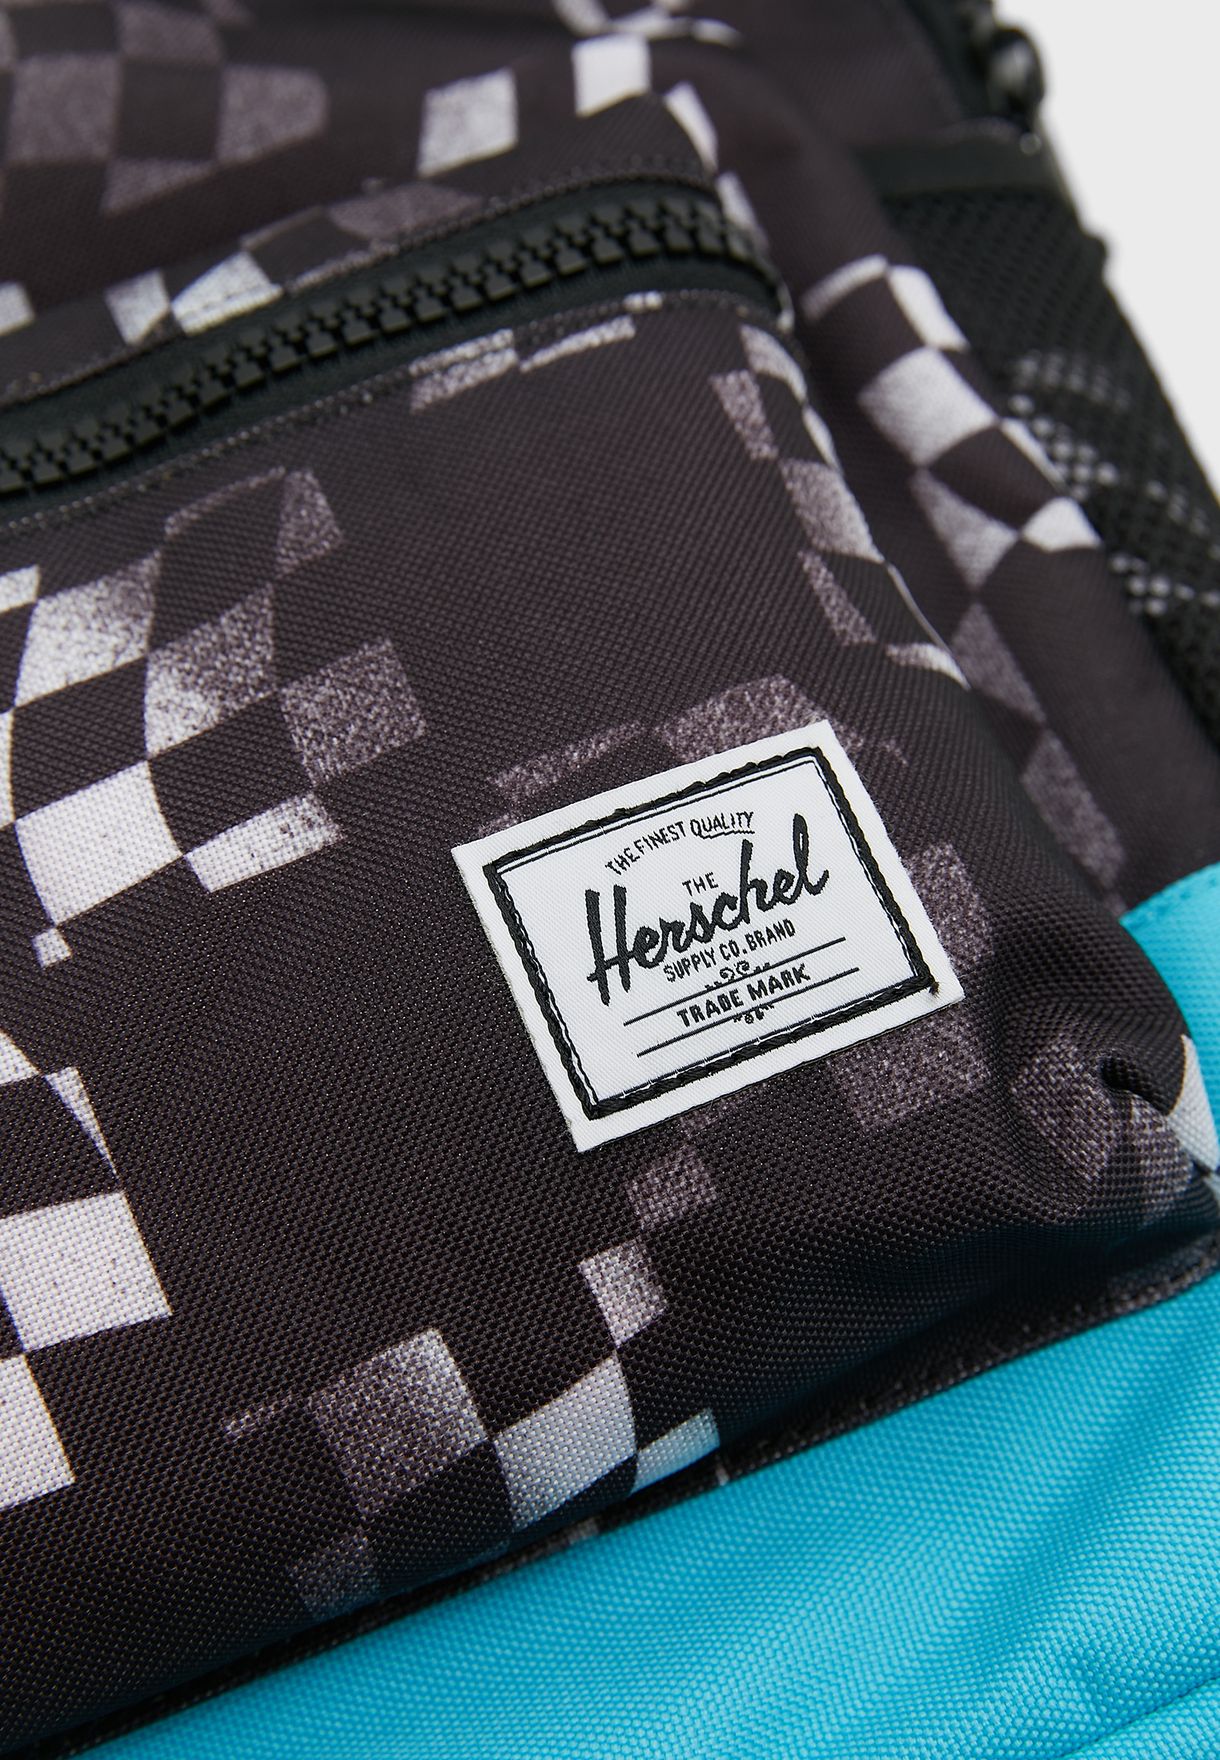 Youth Race Check Print Backpack